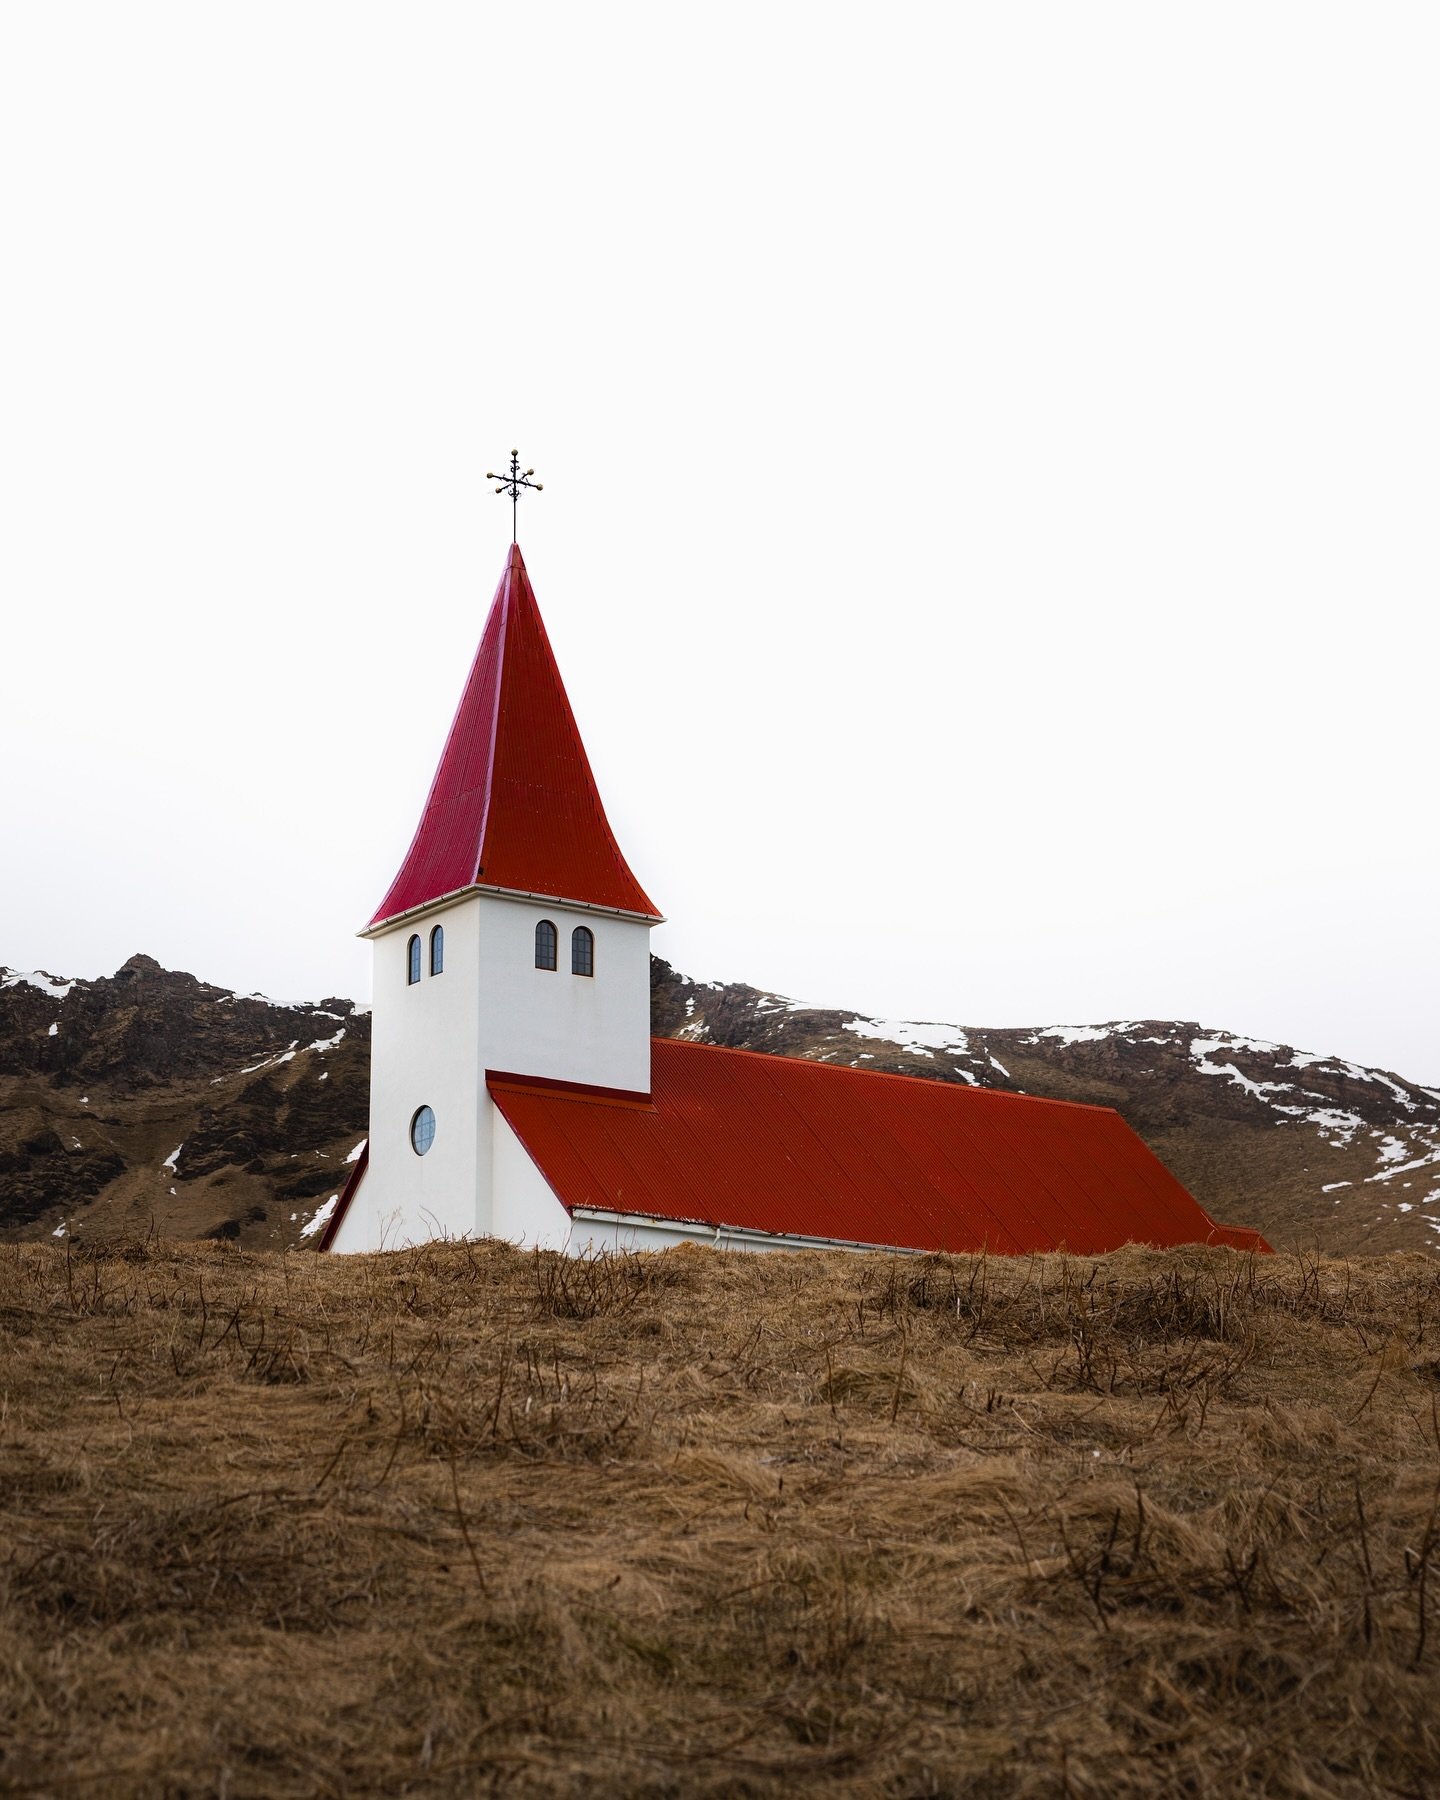 V&iacute;k i Myrdal Church // A sight to behold in the peaceful village of Vik. Just this little church situated on top of a hill, offering beautiful views of this southern coast village. 

#iceland #icelandtravel #icelanders #icelandtrip #vik #icela